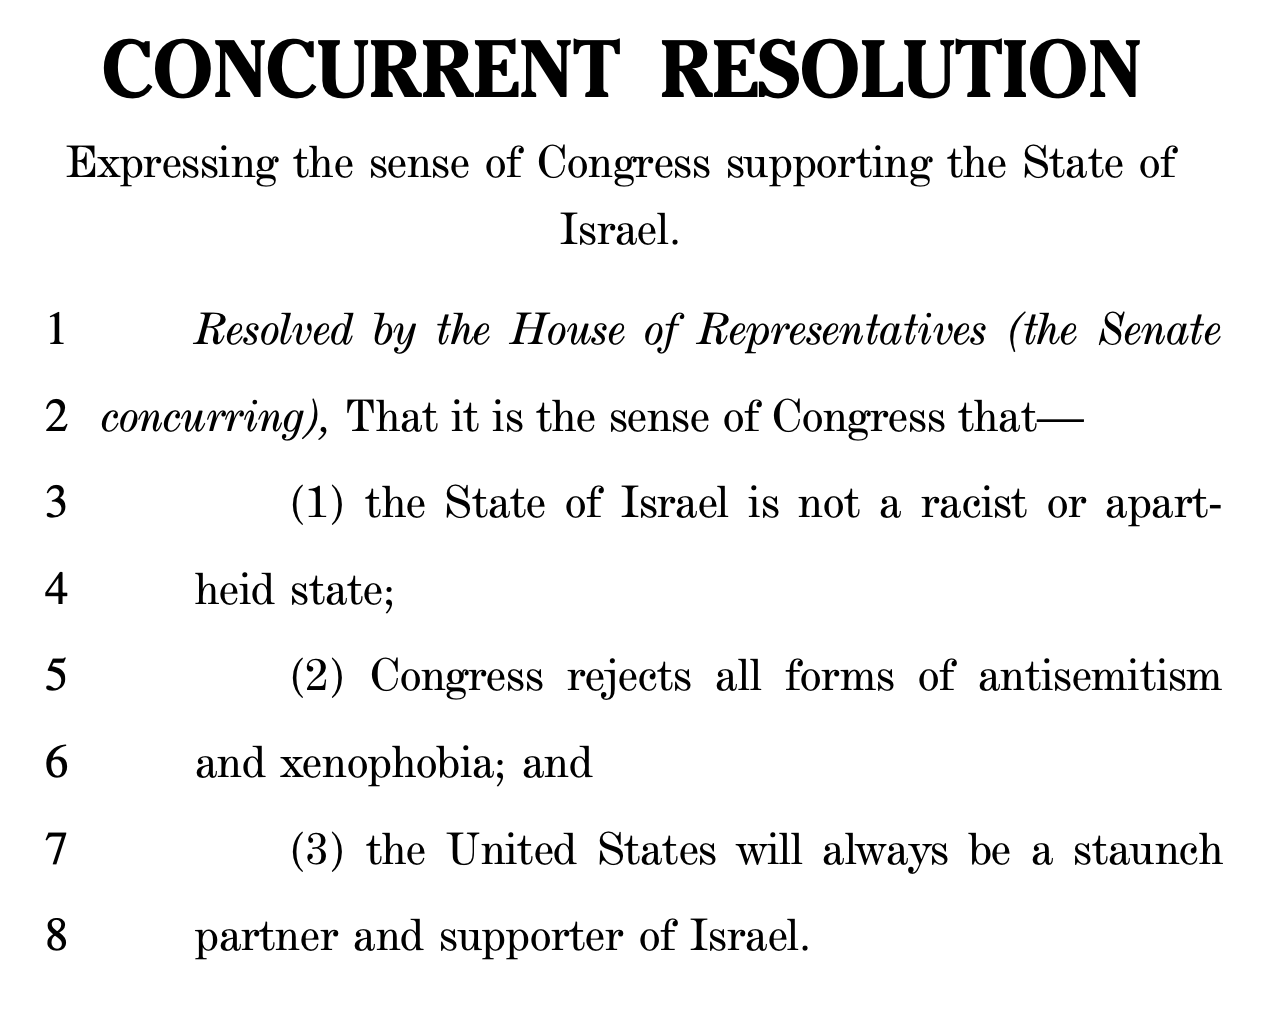 Resolved by the House of Representatives that it is the sense of Congress that — 1. the State of Israel is not a racist or apartheid state; 2. Congress rejects all forms of antisemitism and xenophobia; 3. the United States will always be a staunch partner and supporter of Israel.